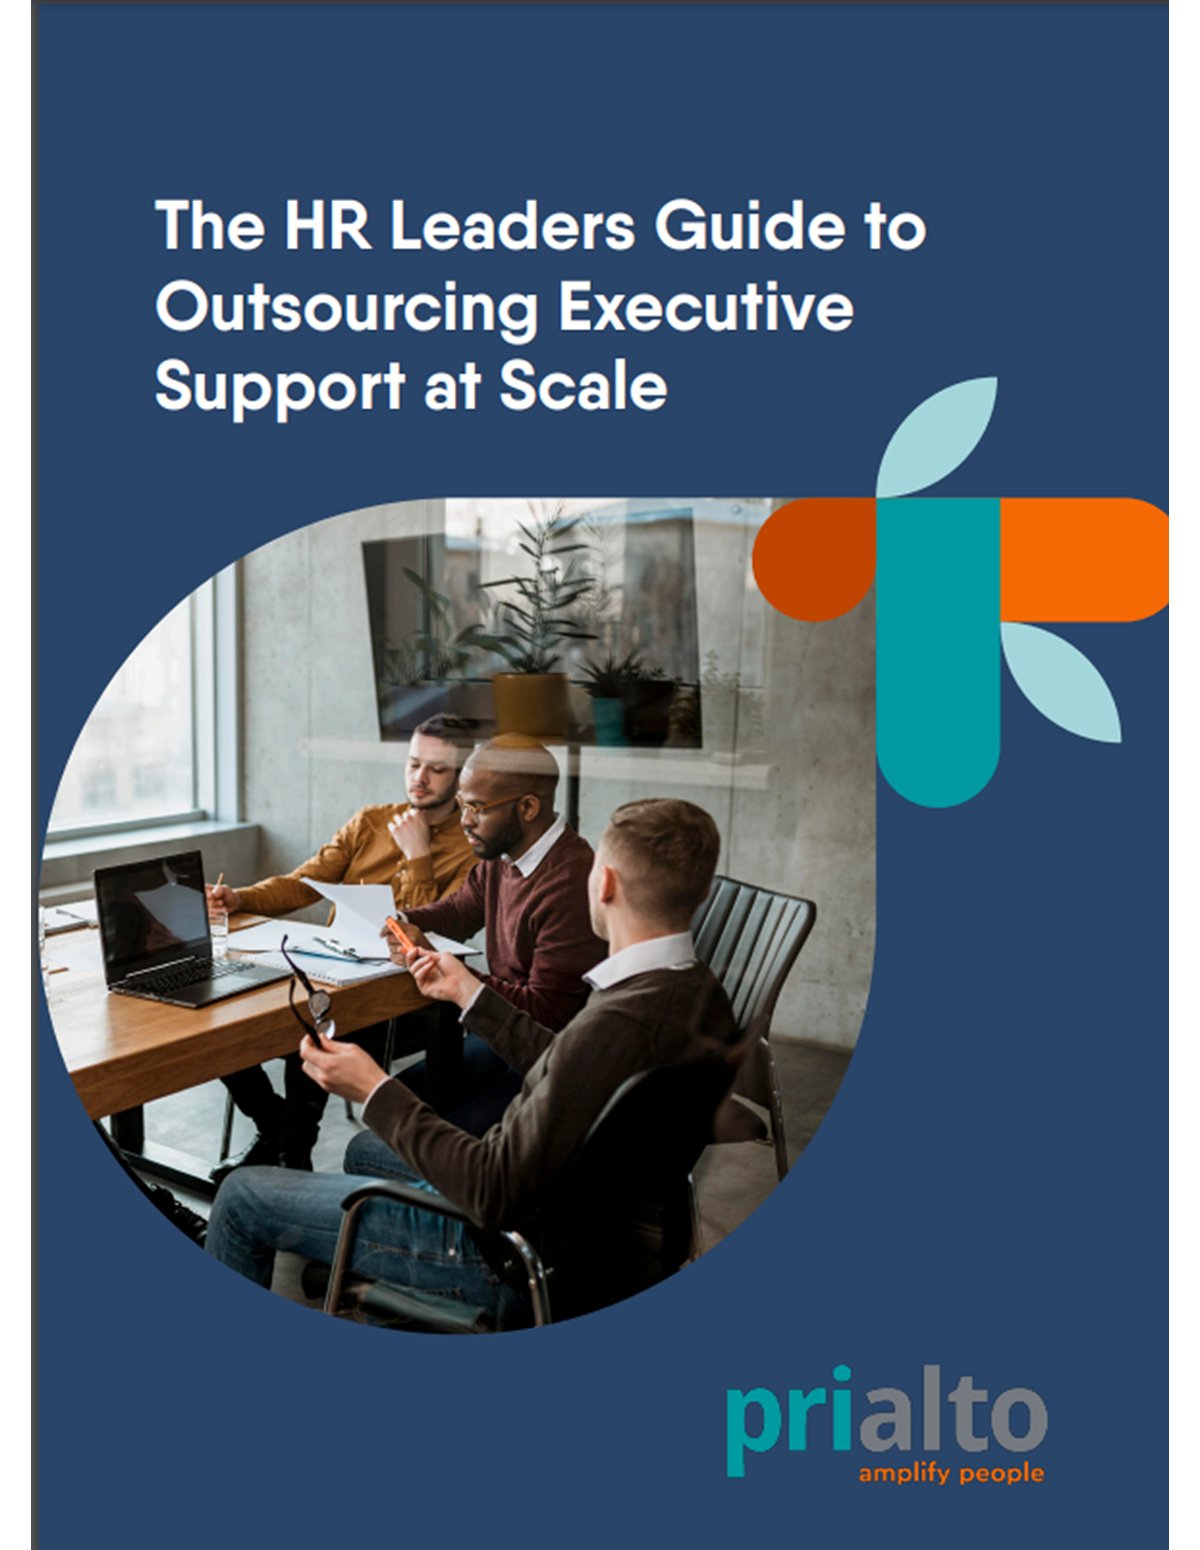 Ebook: The HR Leaders Guide to Outsourcing Executive Support at Scale